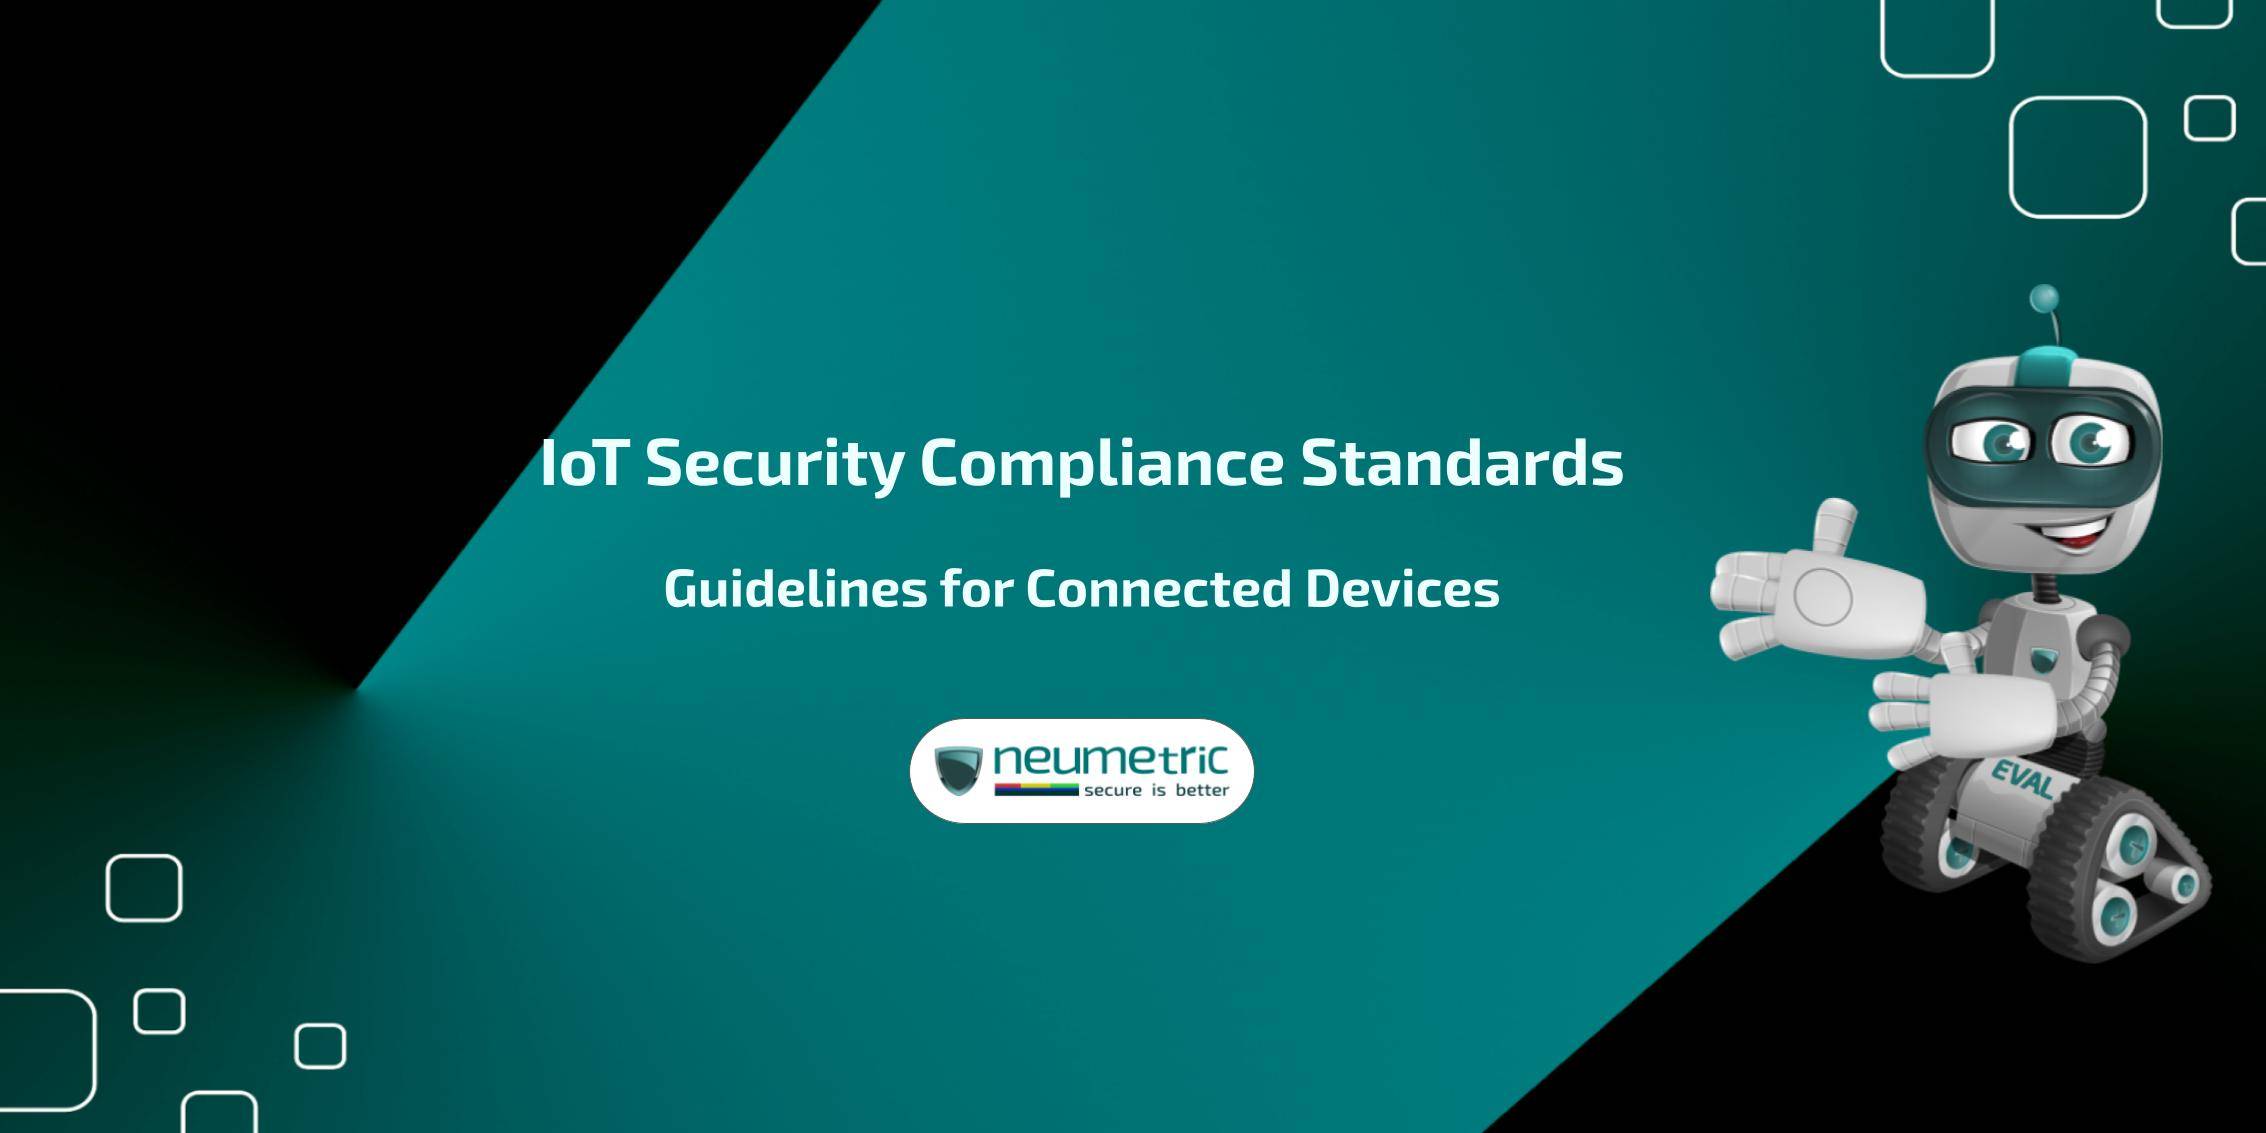 IoT Security Compliance